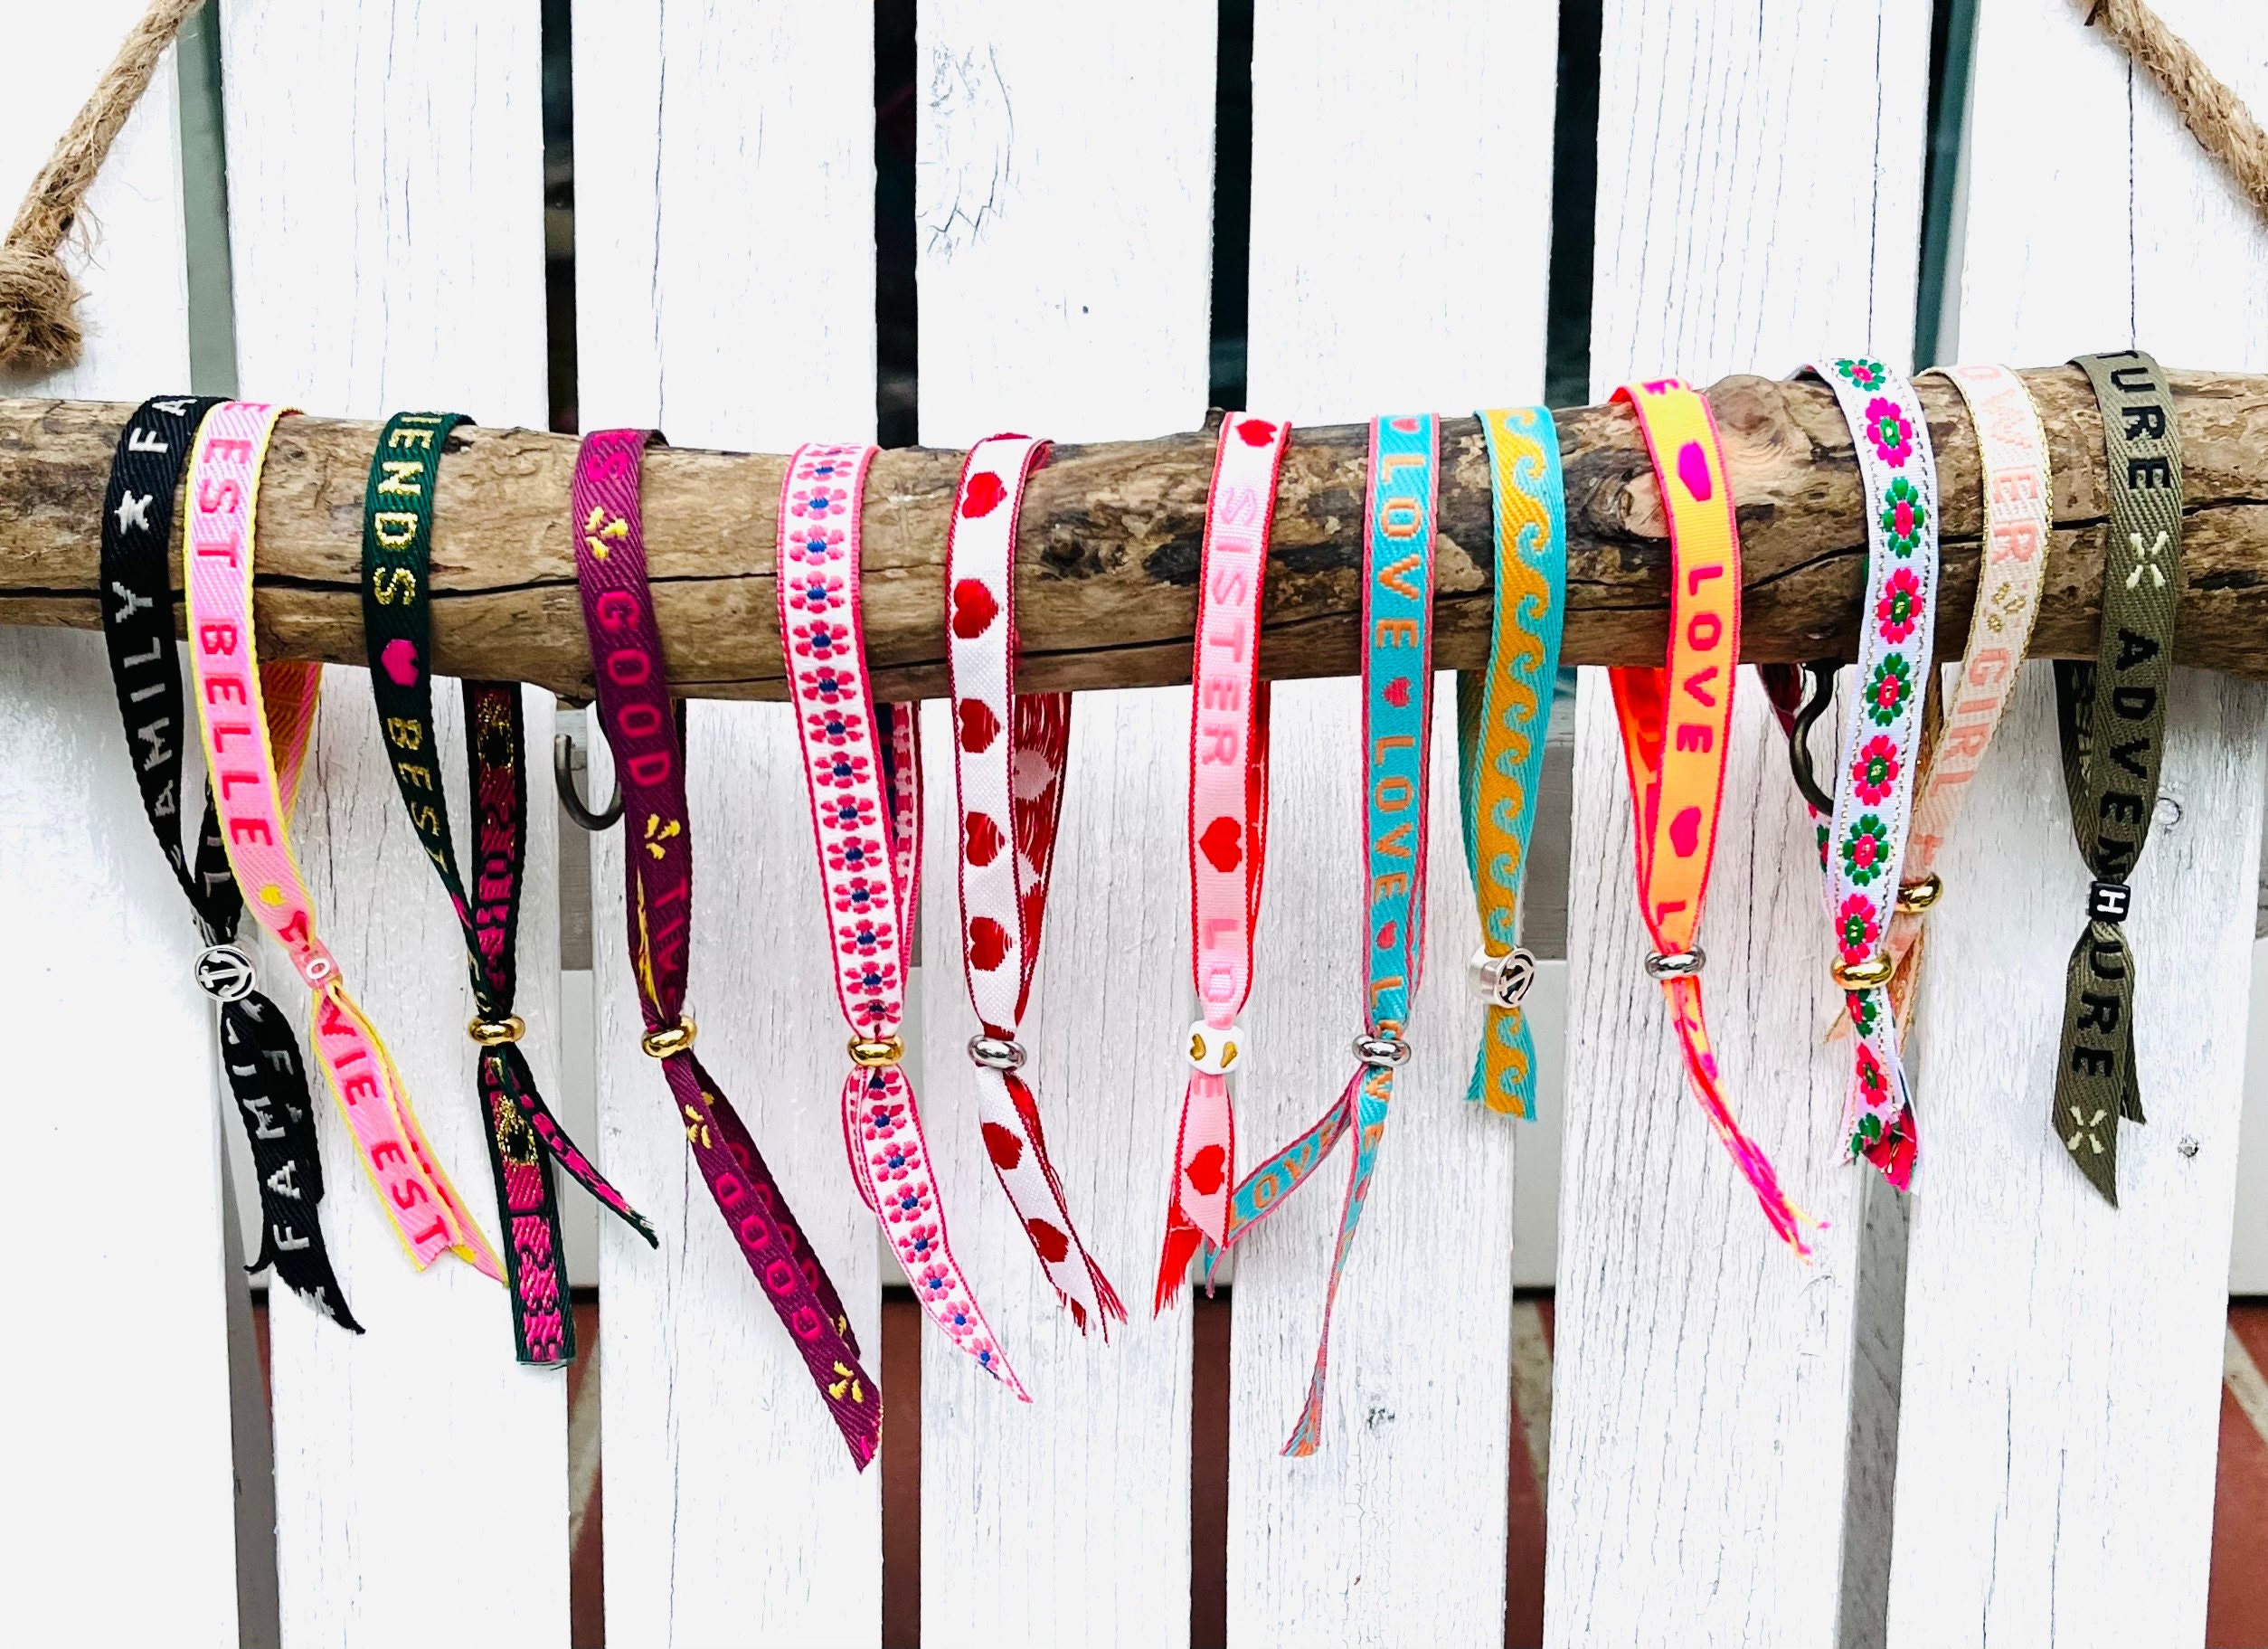 AYAHUASCA BRACELETS LITTLE FOR SALE - Experience the Soul of the Amazon